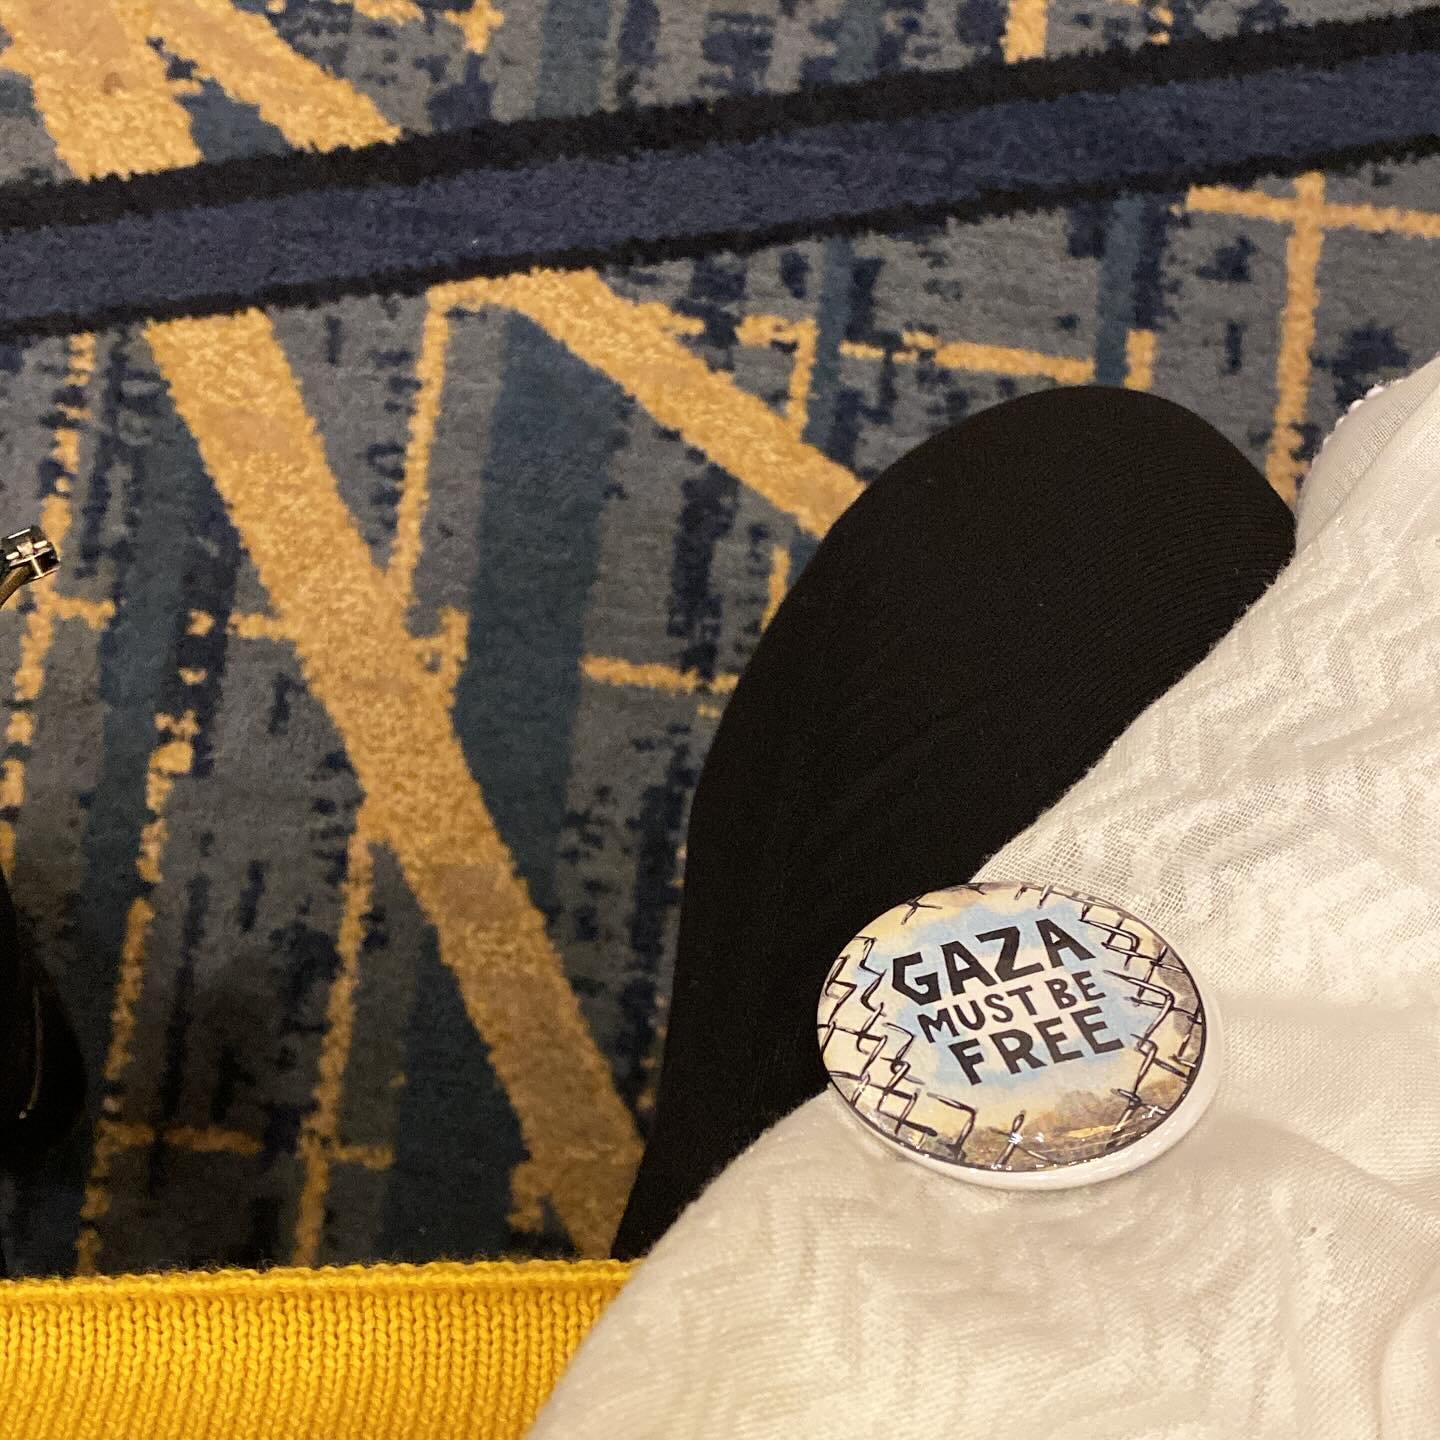 When my outfit talks to the carpet #freegaza edition. Our students @sjp.uiuc are being threatened with a police assault. Please support them by sharing their posts, calling U of I trustees, and showing up to protect them. Courtesy of a proud member o